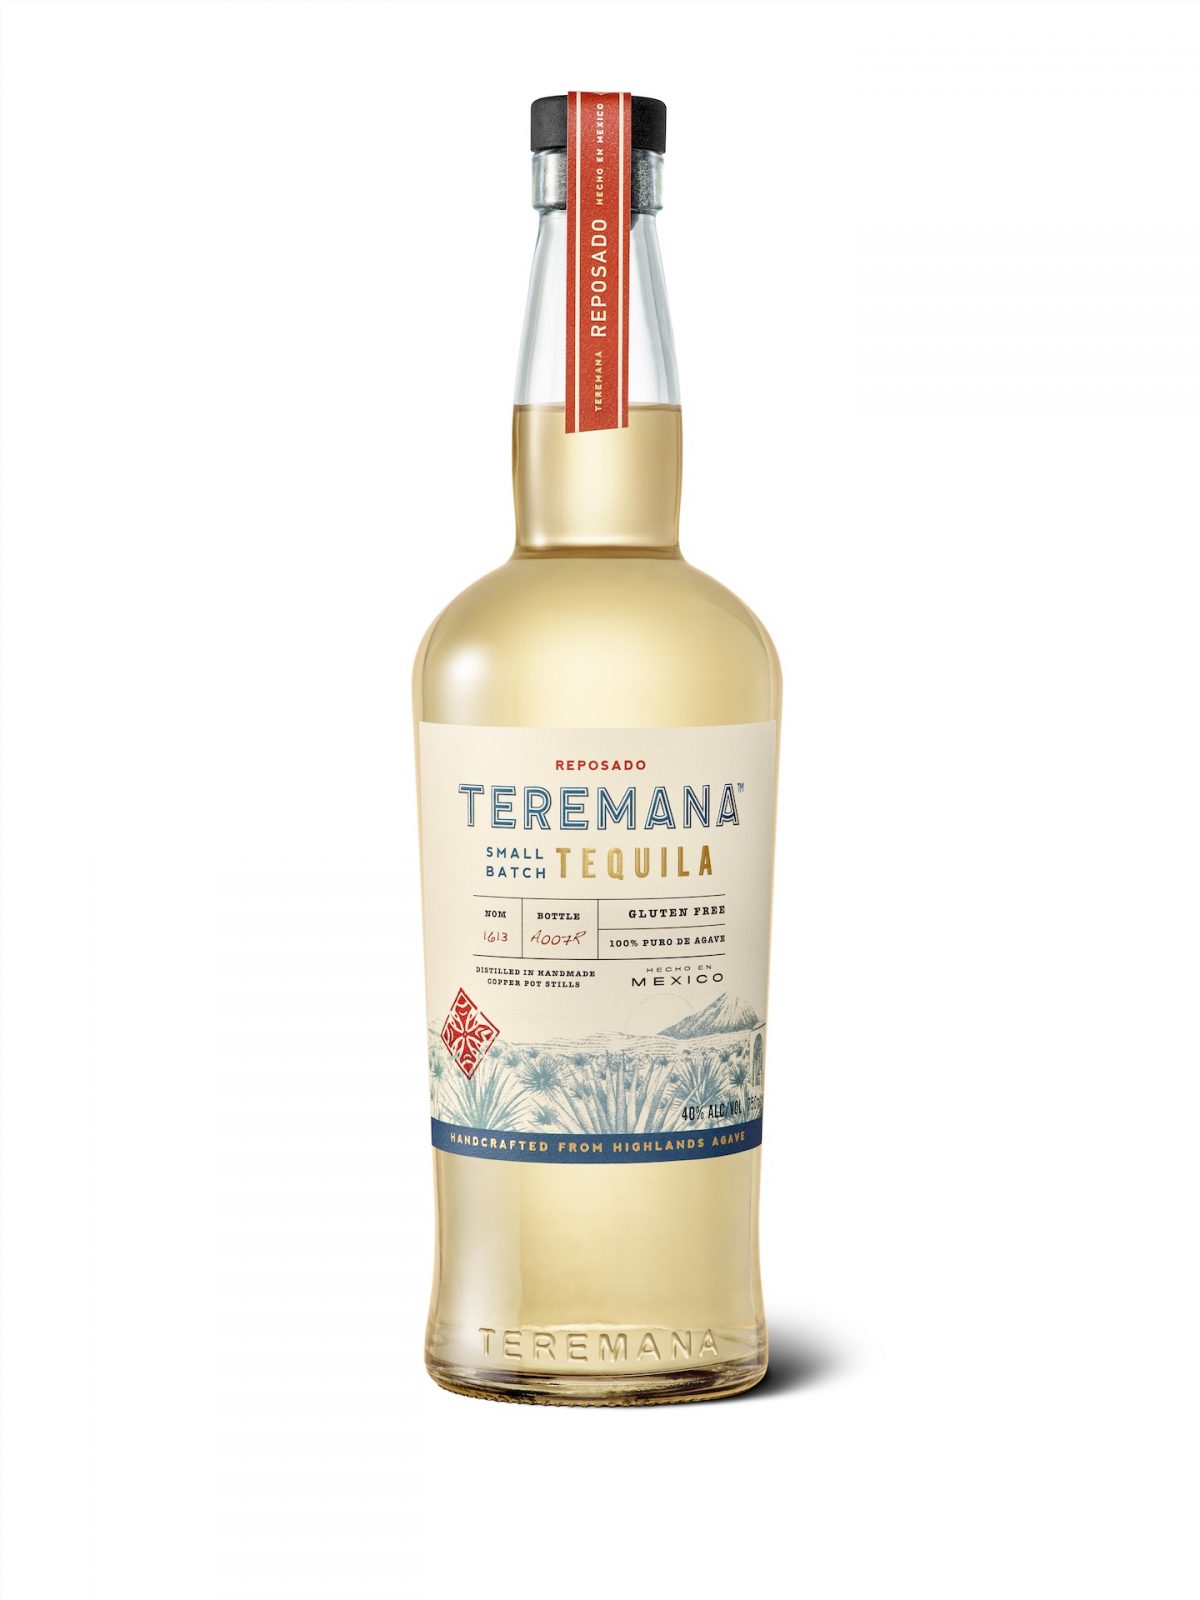 Dwayne ‘The Rock’ Johnson’s Teremana Small Batch Tequila Is For The People